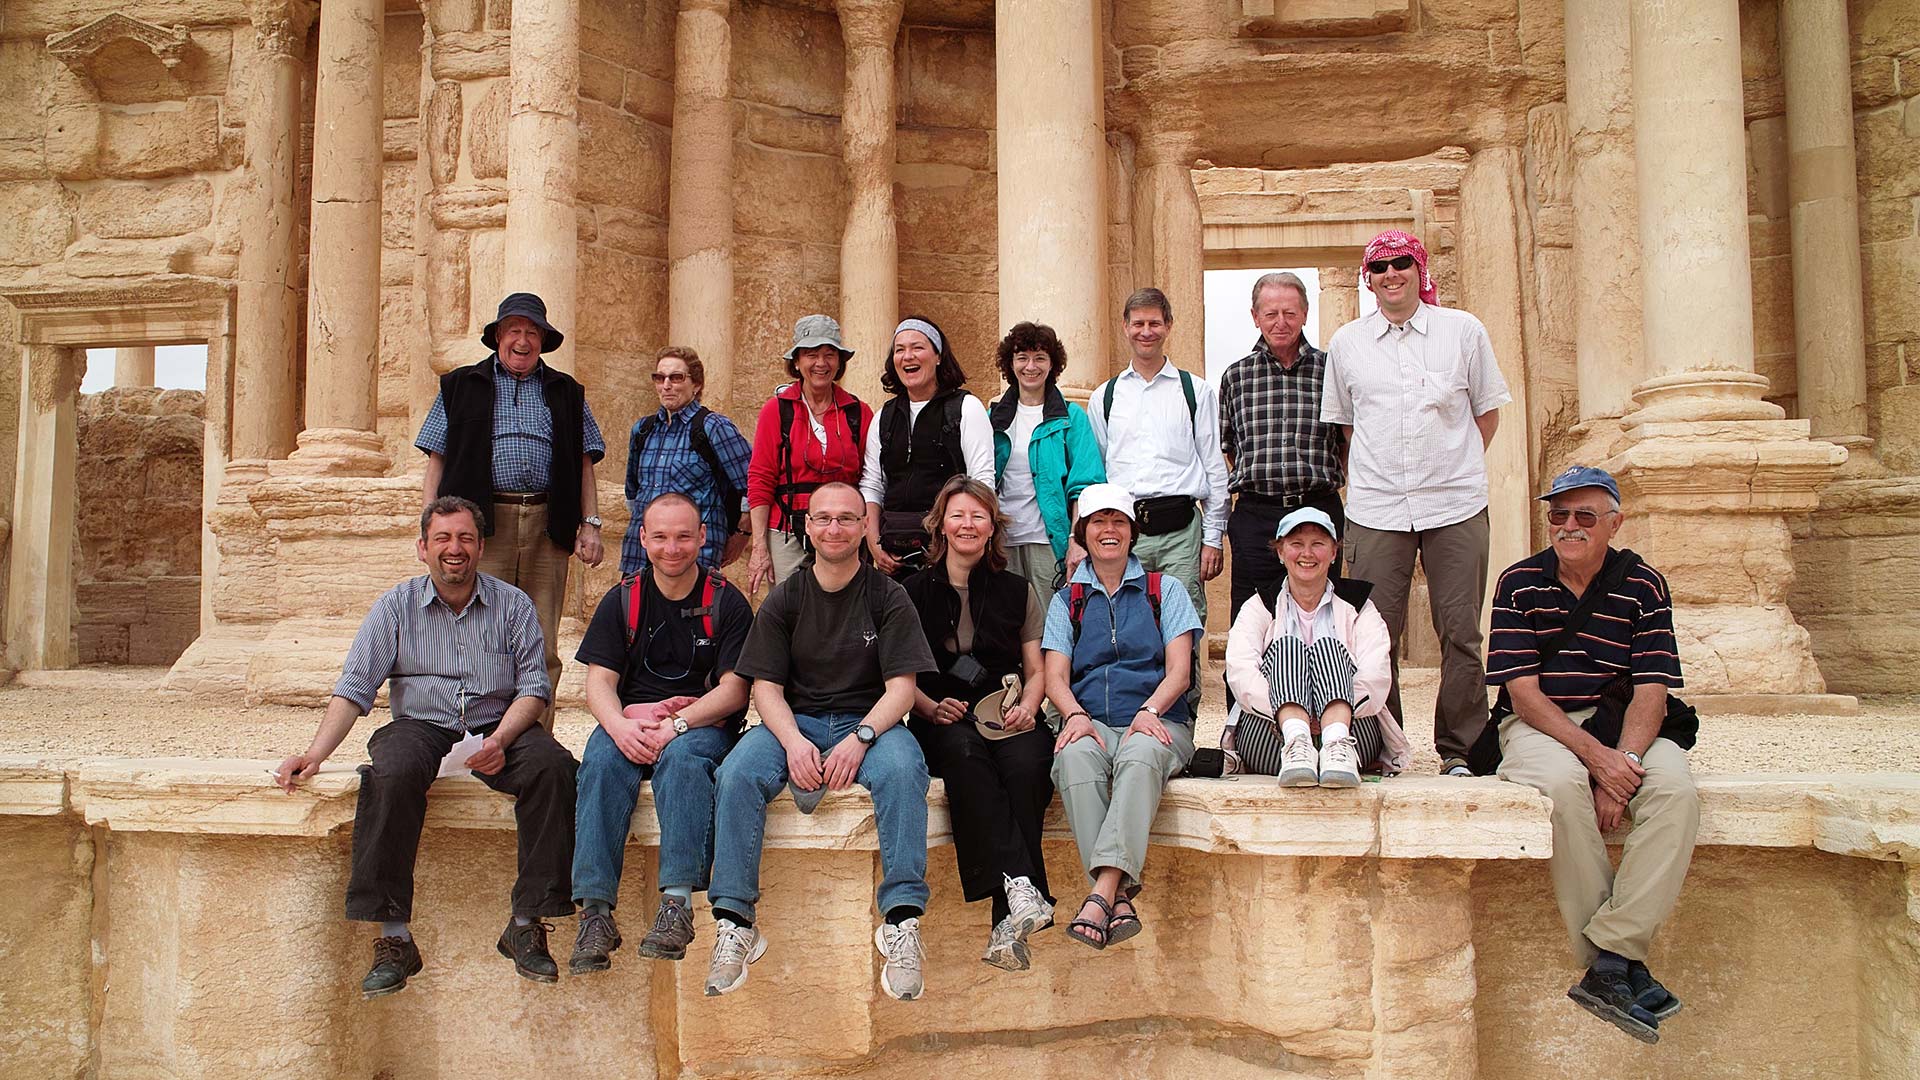 The photograph immortalizes a joyful group of tourists, their faces beaming with happiness, after their visit to Palmyra, the timeless gem that graces the land of Syria.